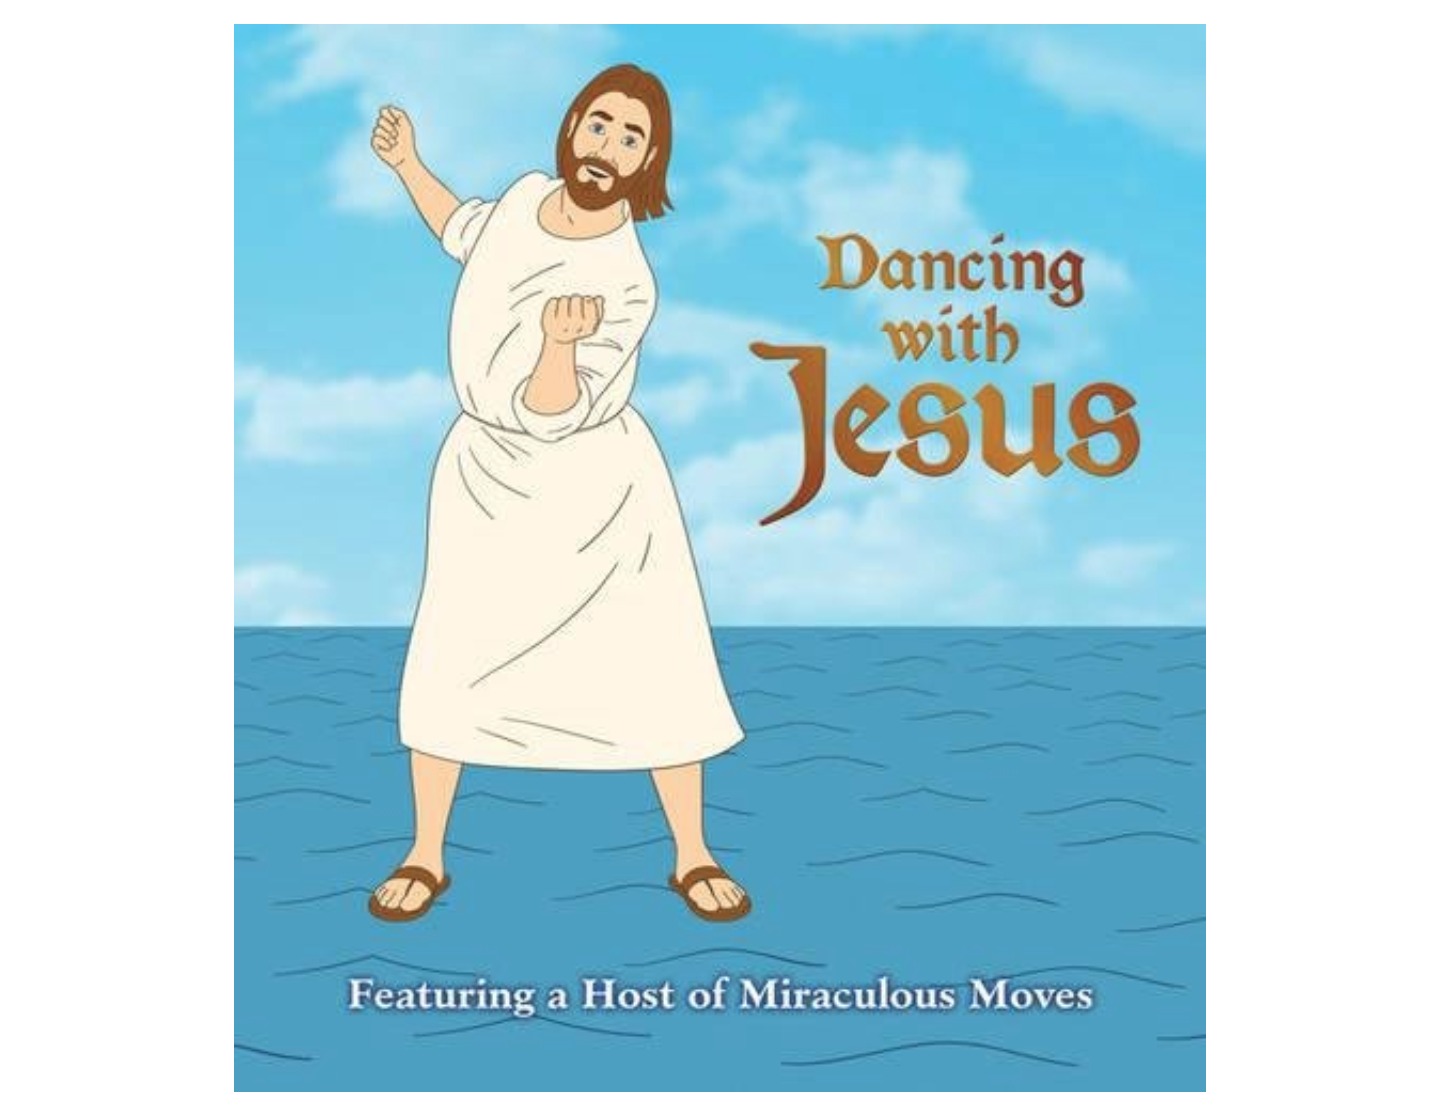 Dancing with Jesus